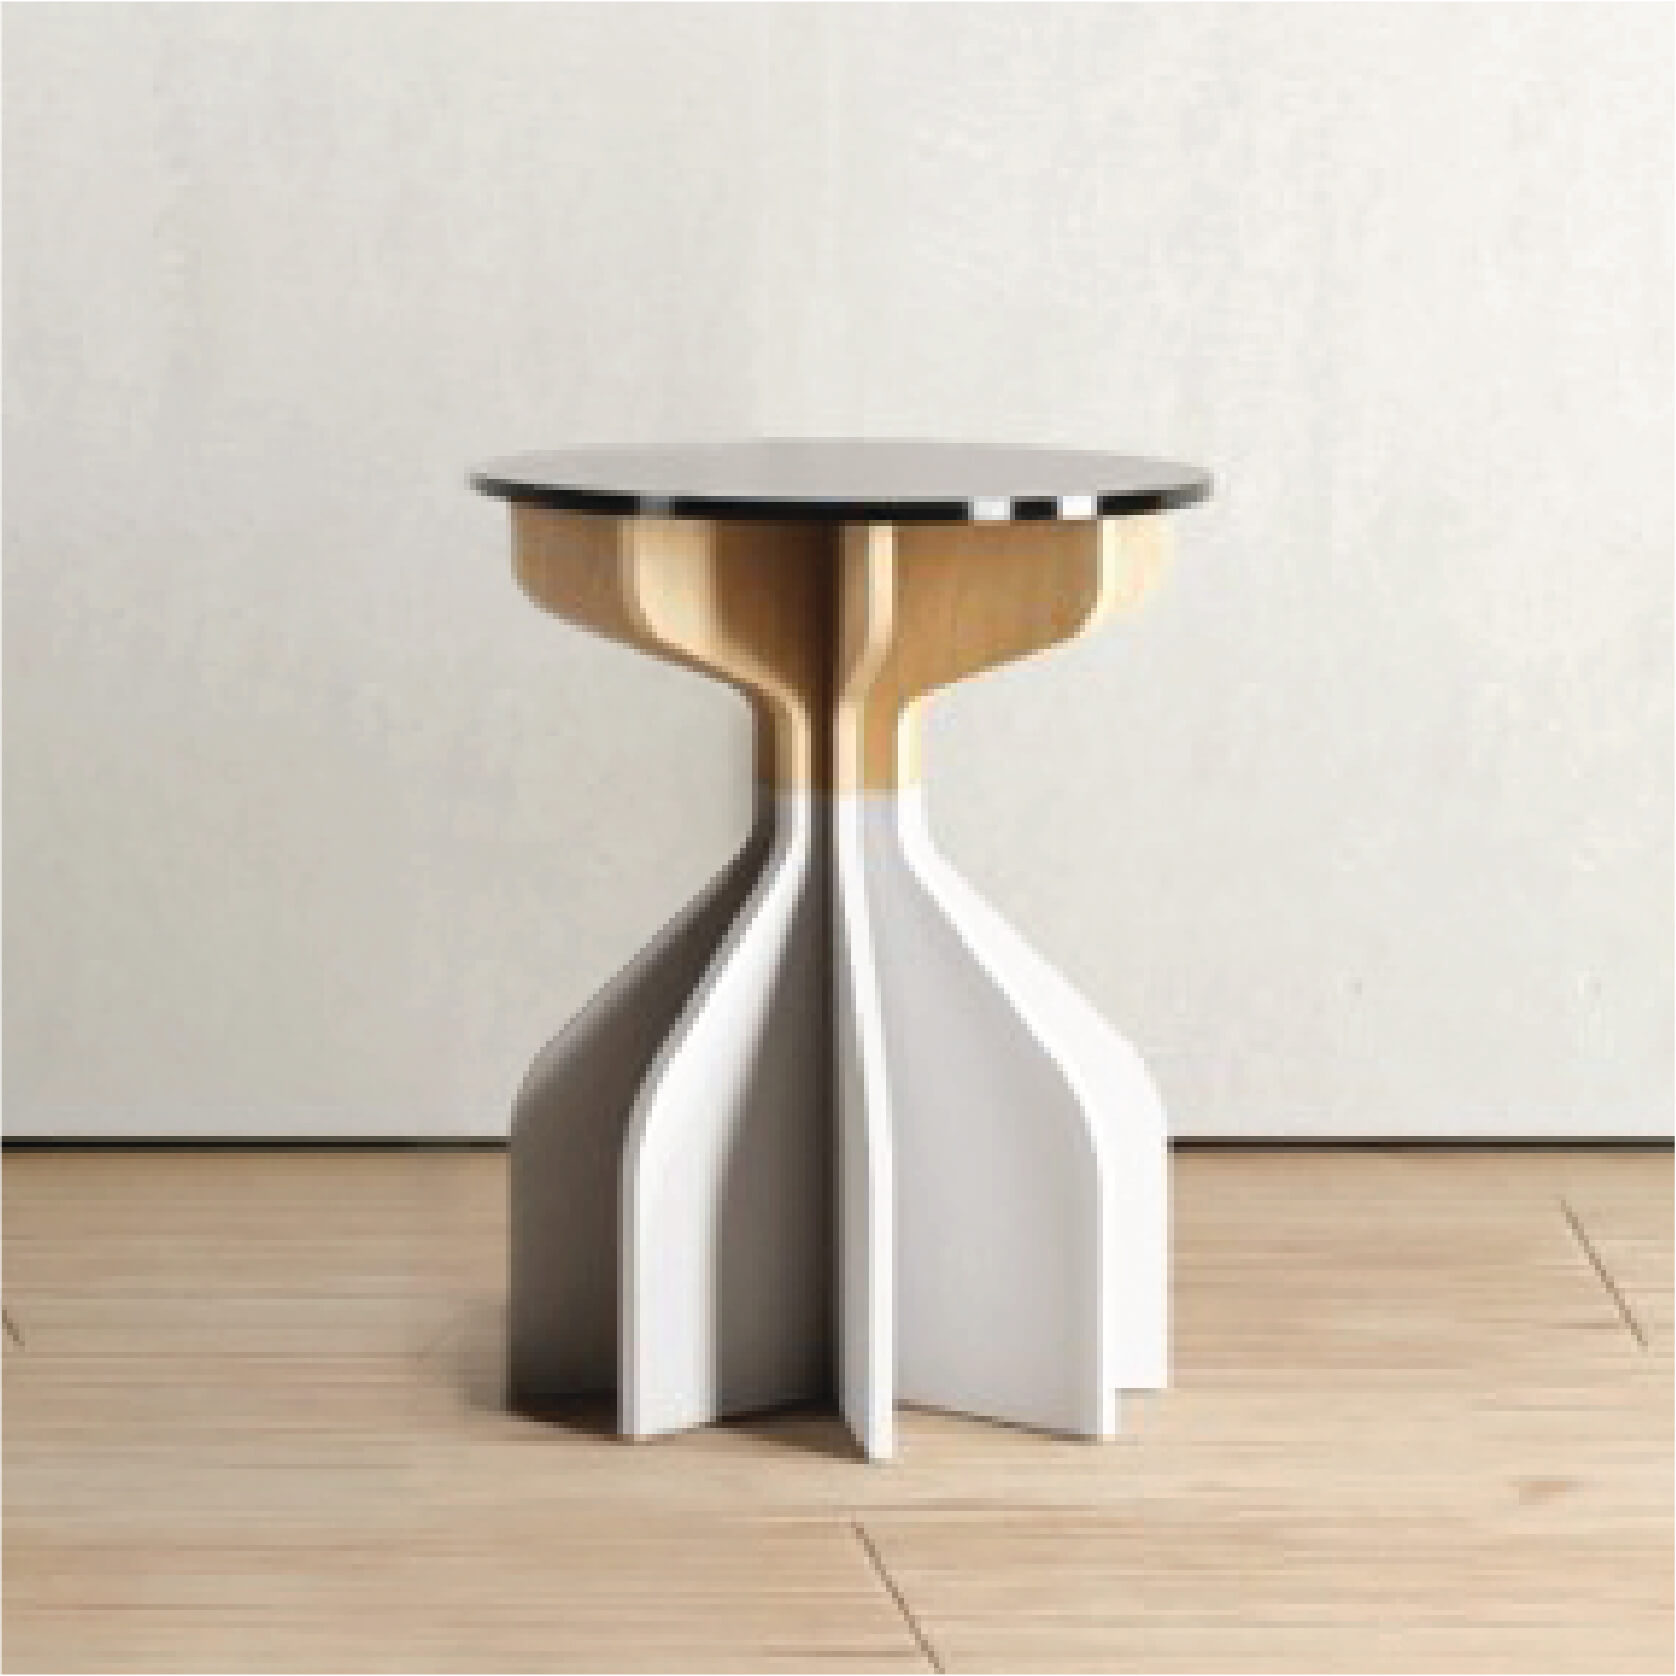 SIDE TABLE by Stonesets - Design Commune Feature